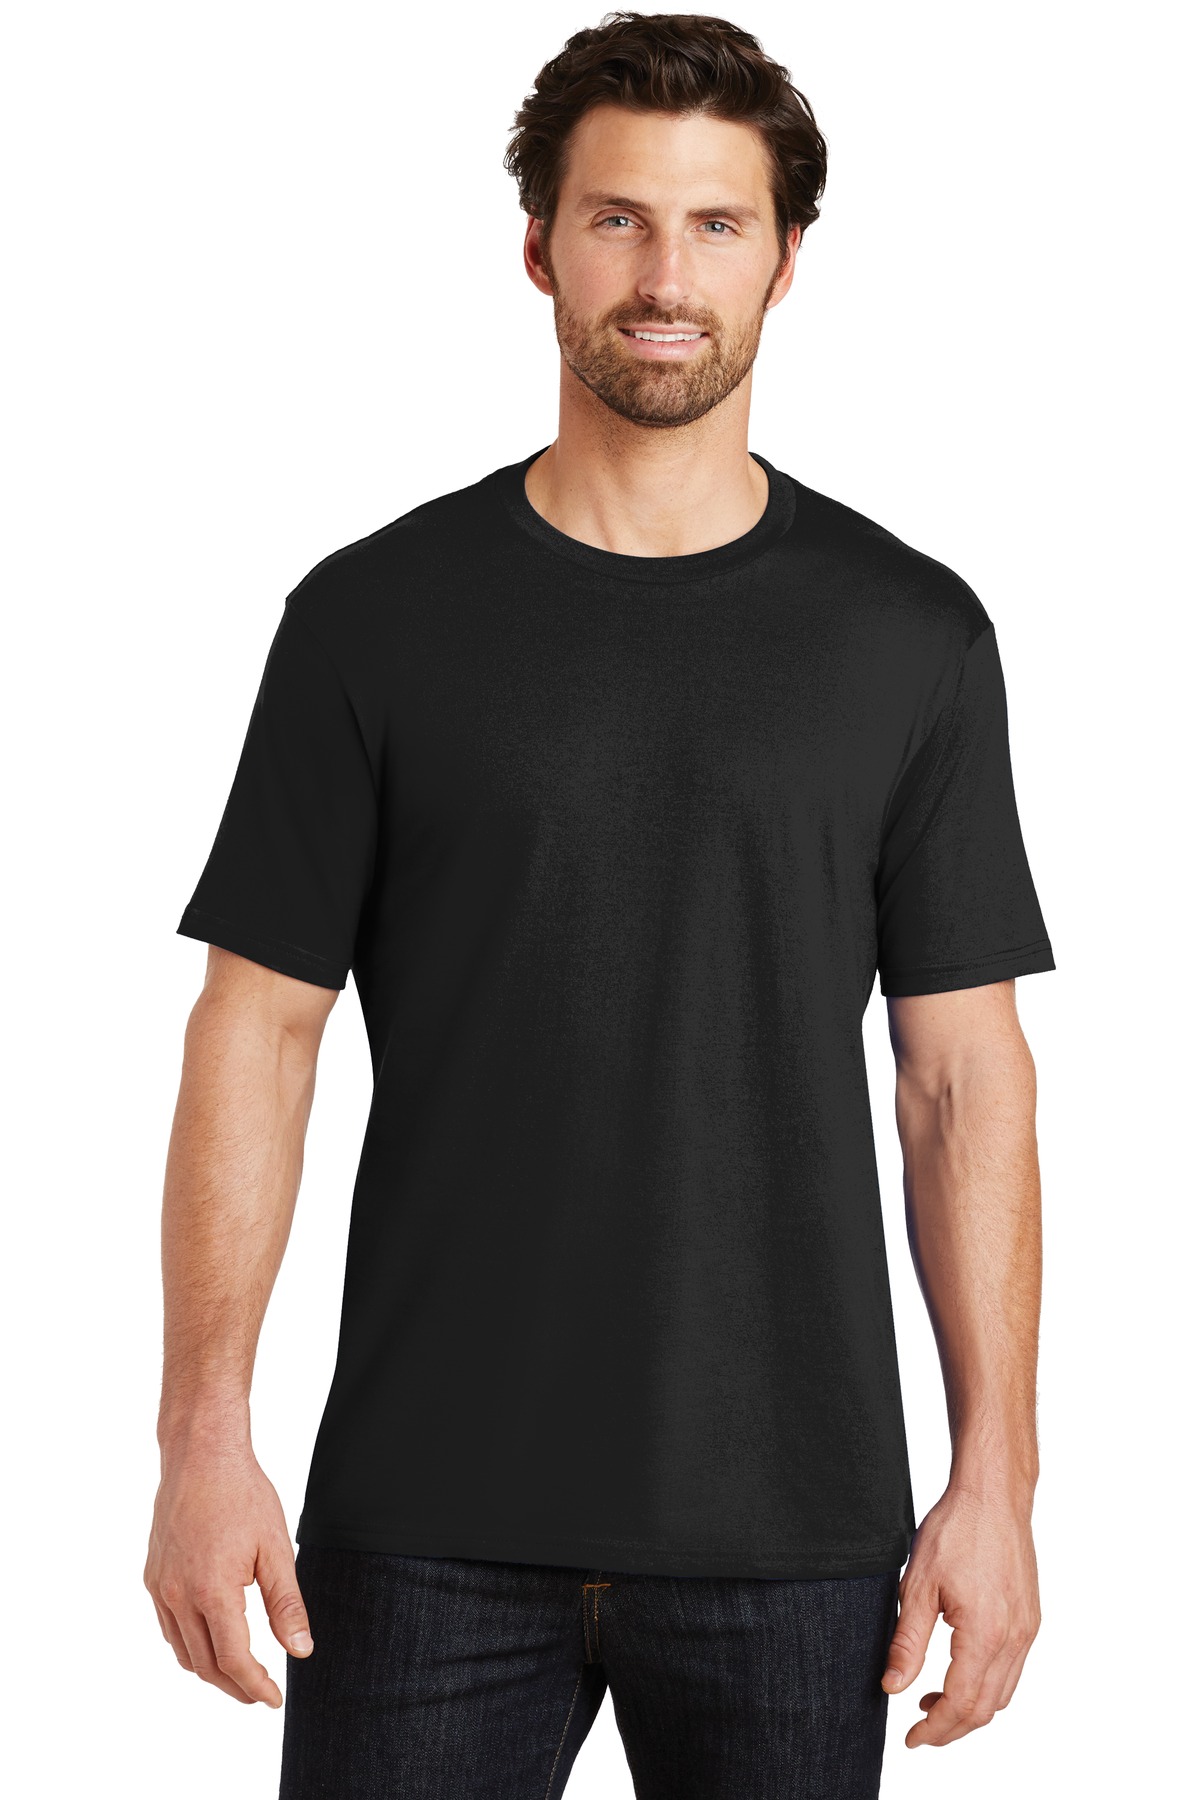 District DT104 | Perfect Weight ® Tee | ShirtSpace